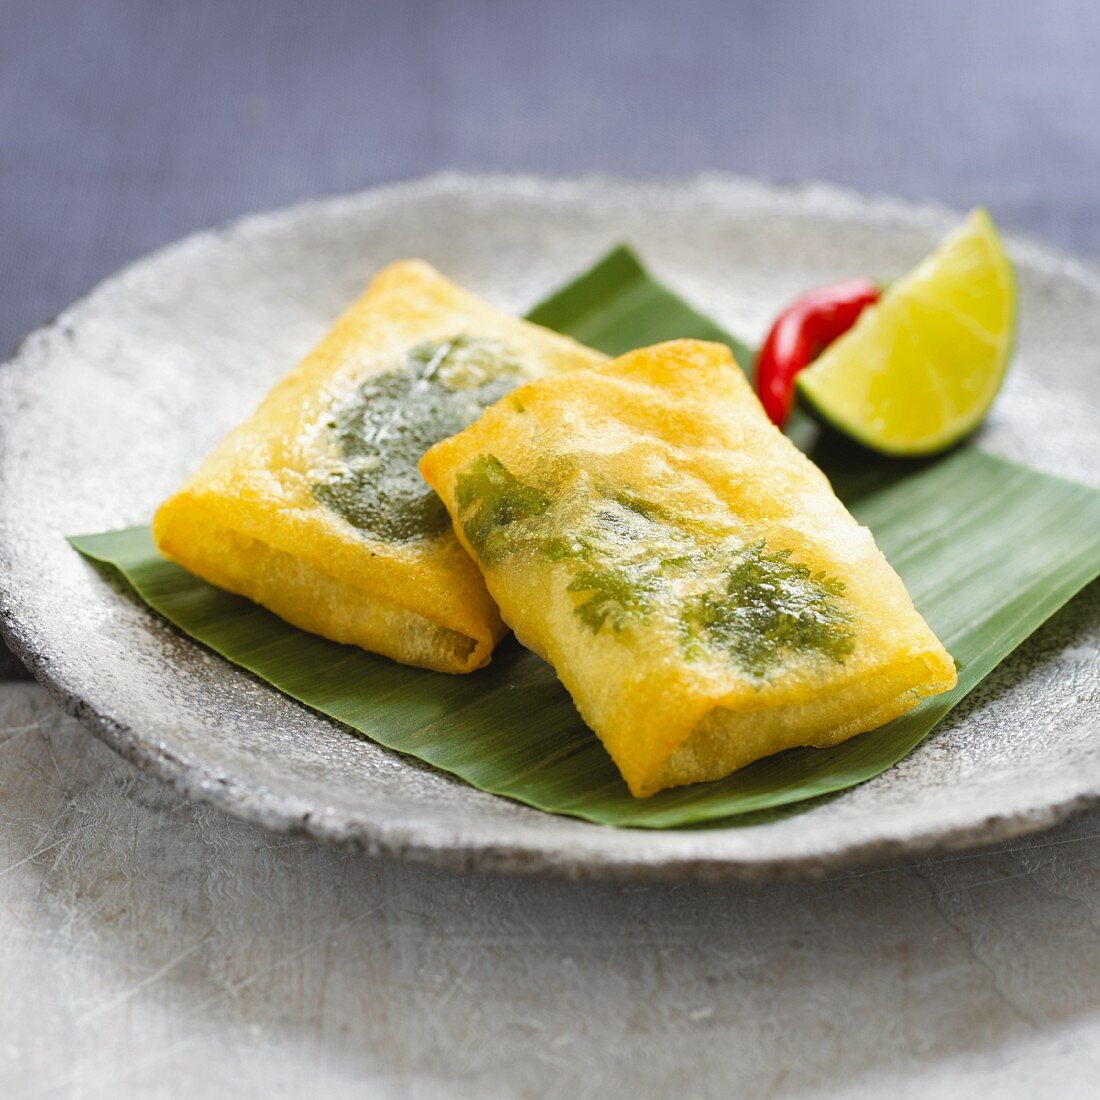 Prawn and herb parcels with chilli peppers and limes (Asia)